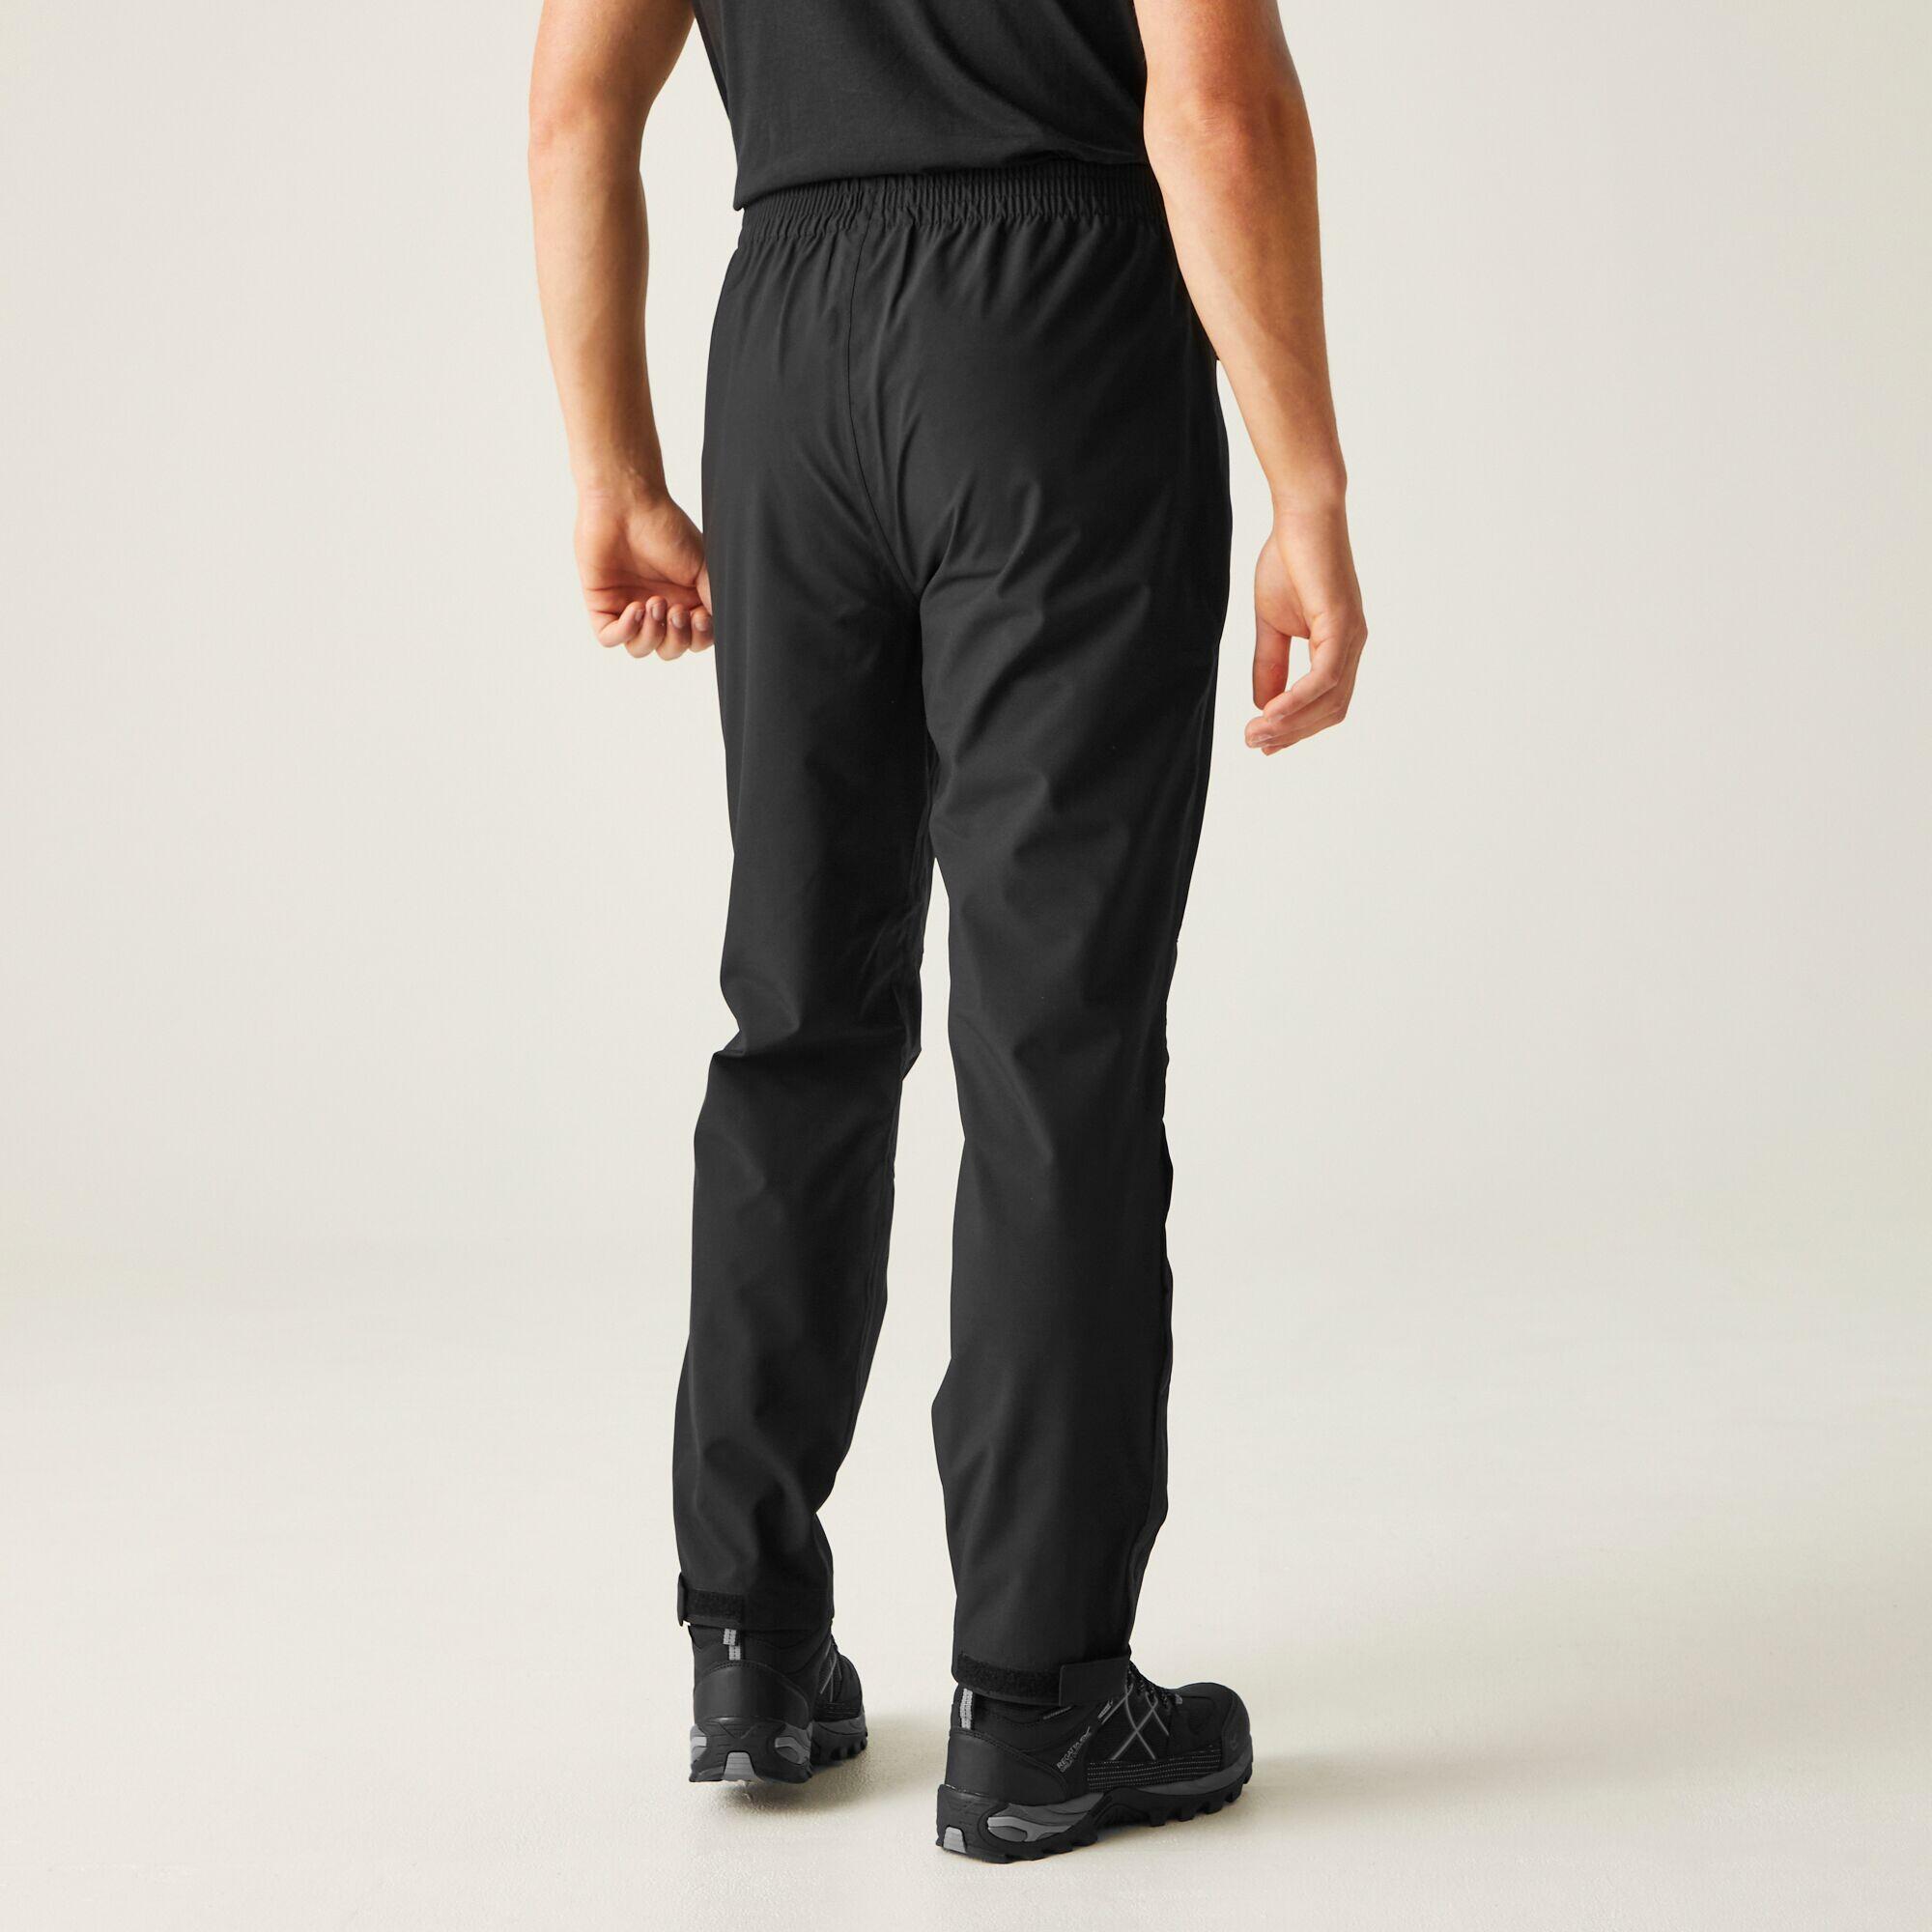 Highton Stretch Men's Hiking Overtrousers - Black 2/5